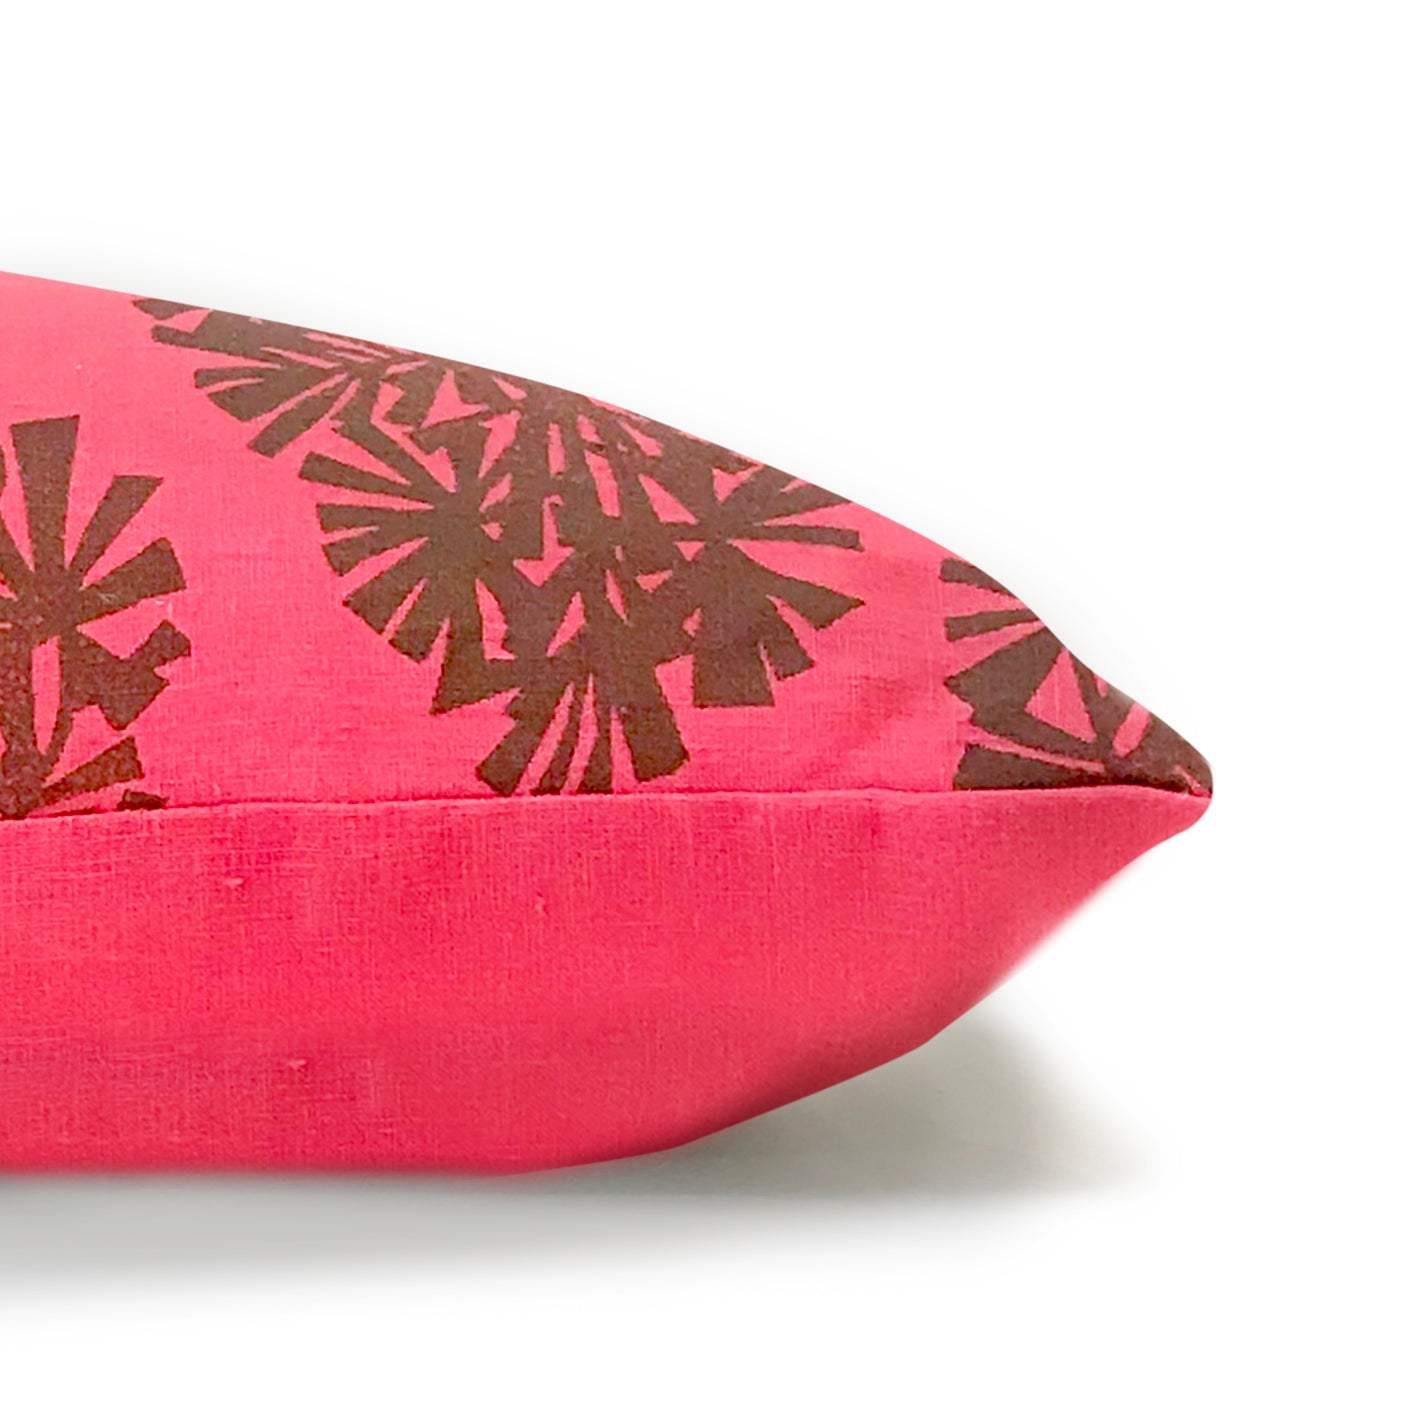 Side view of a throw pillow in pink. One side is printed in a repeating brown geometric pattern.